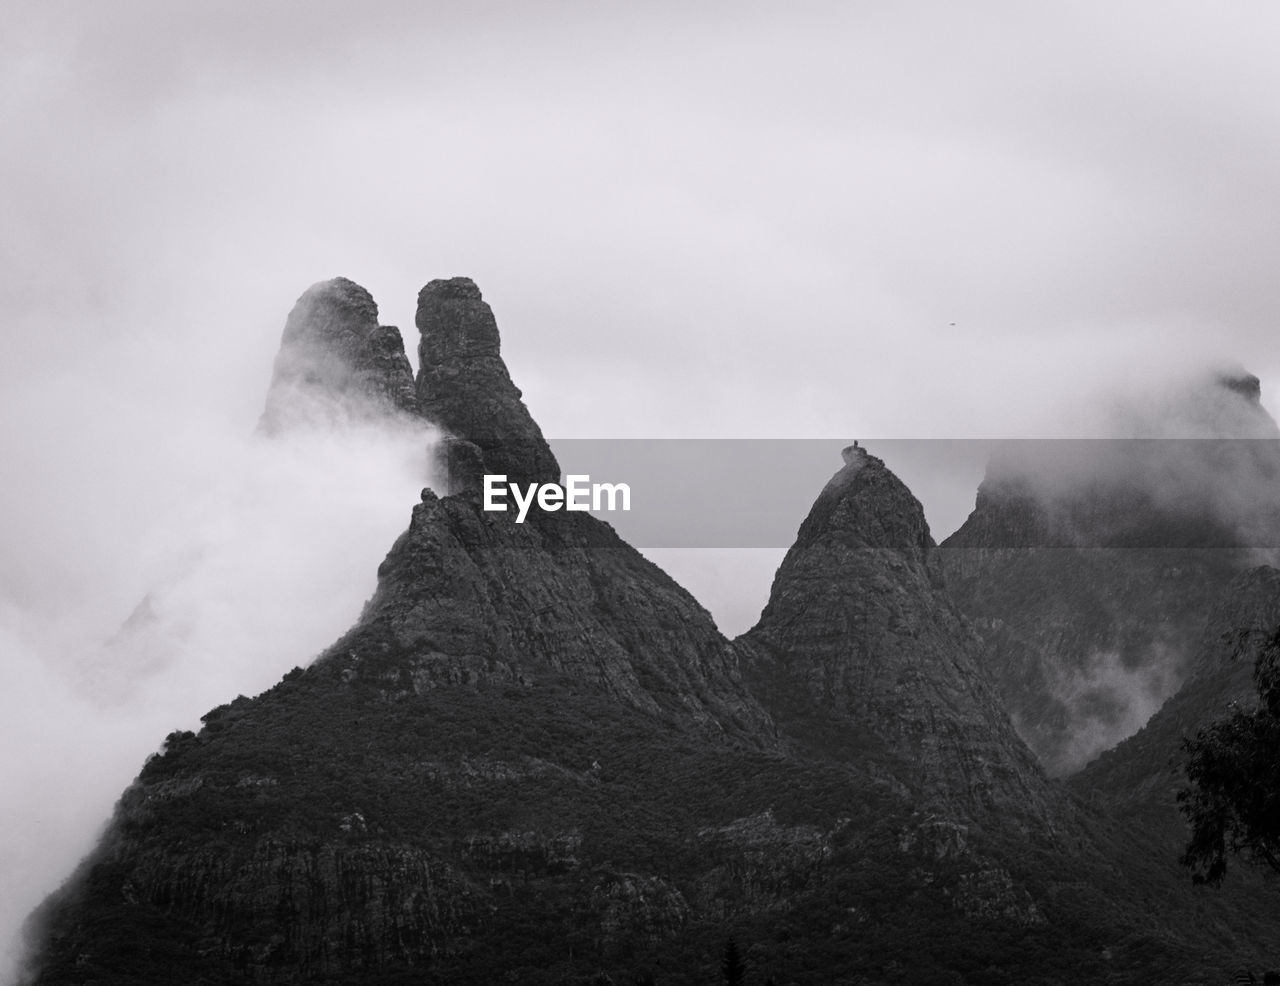 mountain, rock, sky, black and white, cloud, fog, scenics - nature, environment, beauty in nature, monochrome, landscape, nature, monochrome photography, mountain range, mountain peak, travel destinations, land, travel, no people, outdoors, summit, rock formation, non-urban scene, snow, tranquility, darkness, tourism, geology, white, activity, black